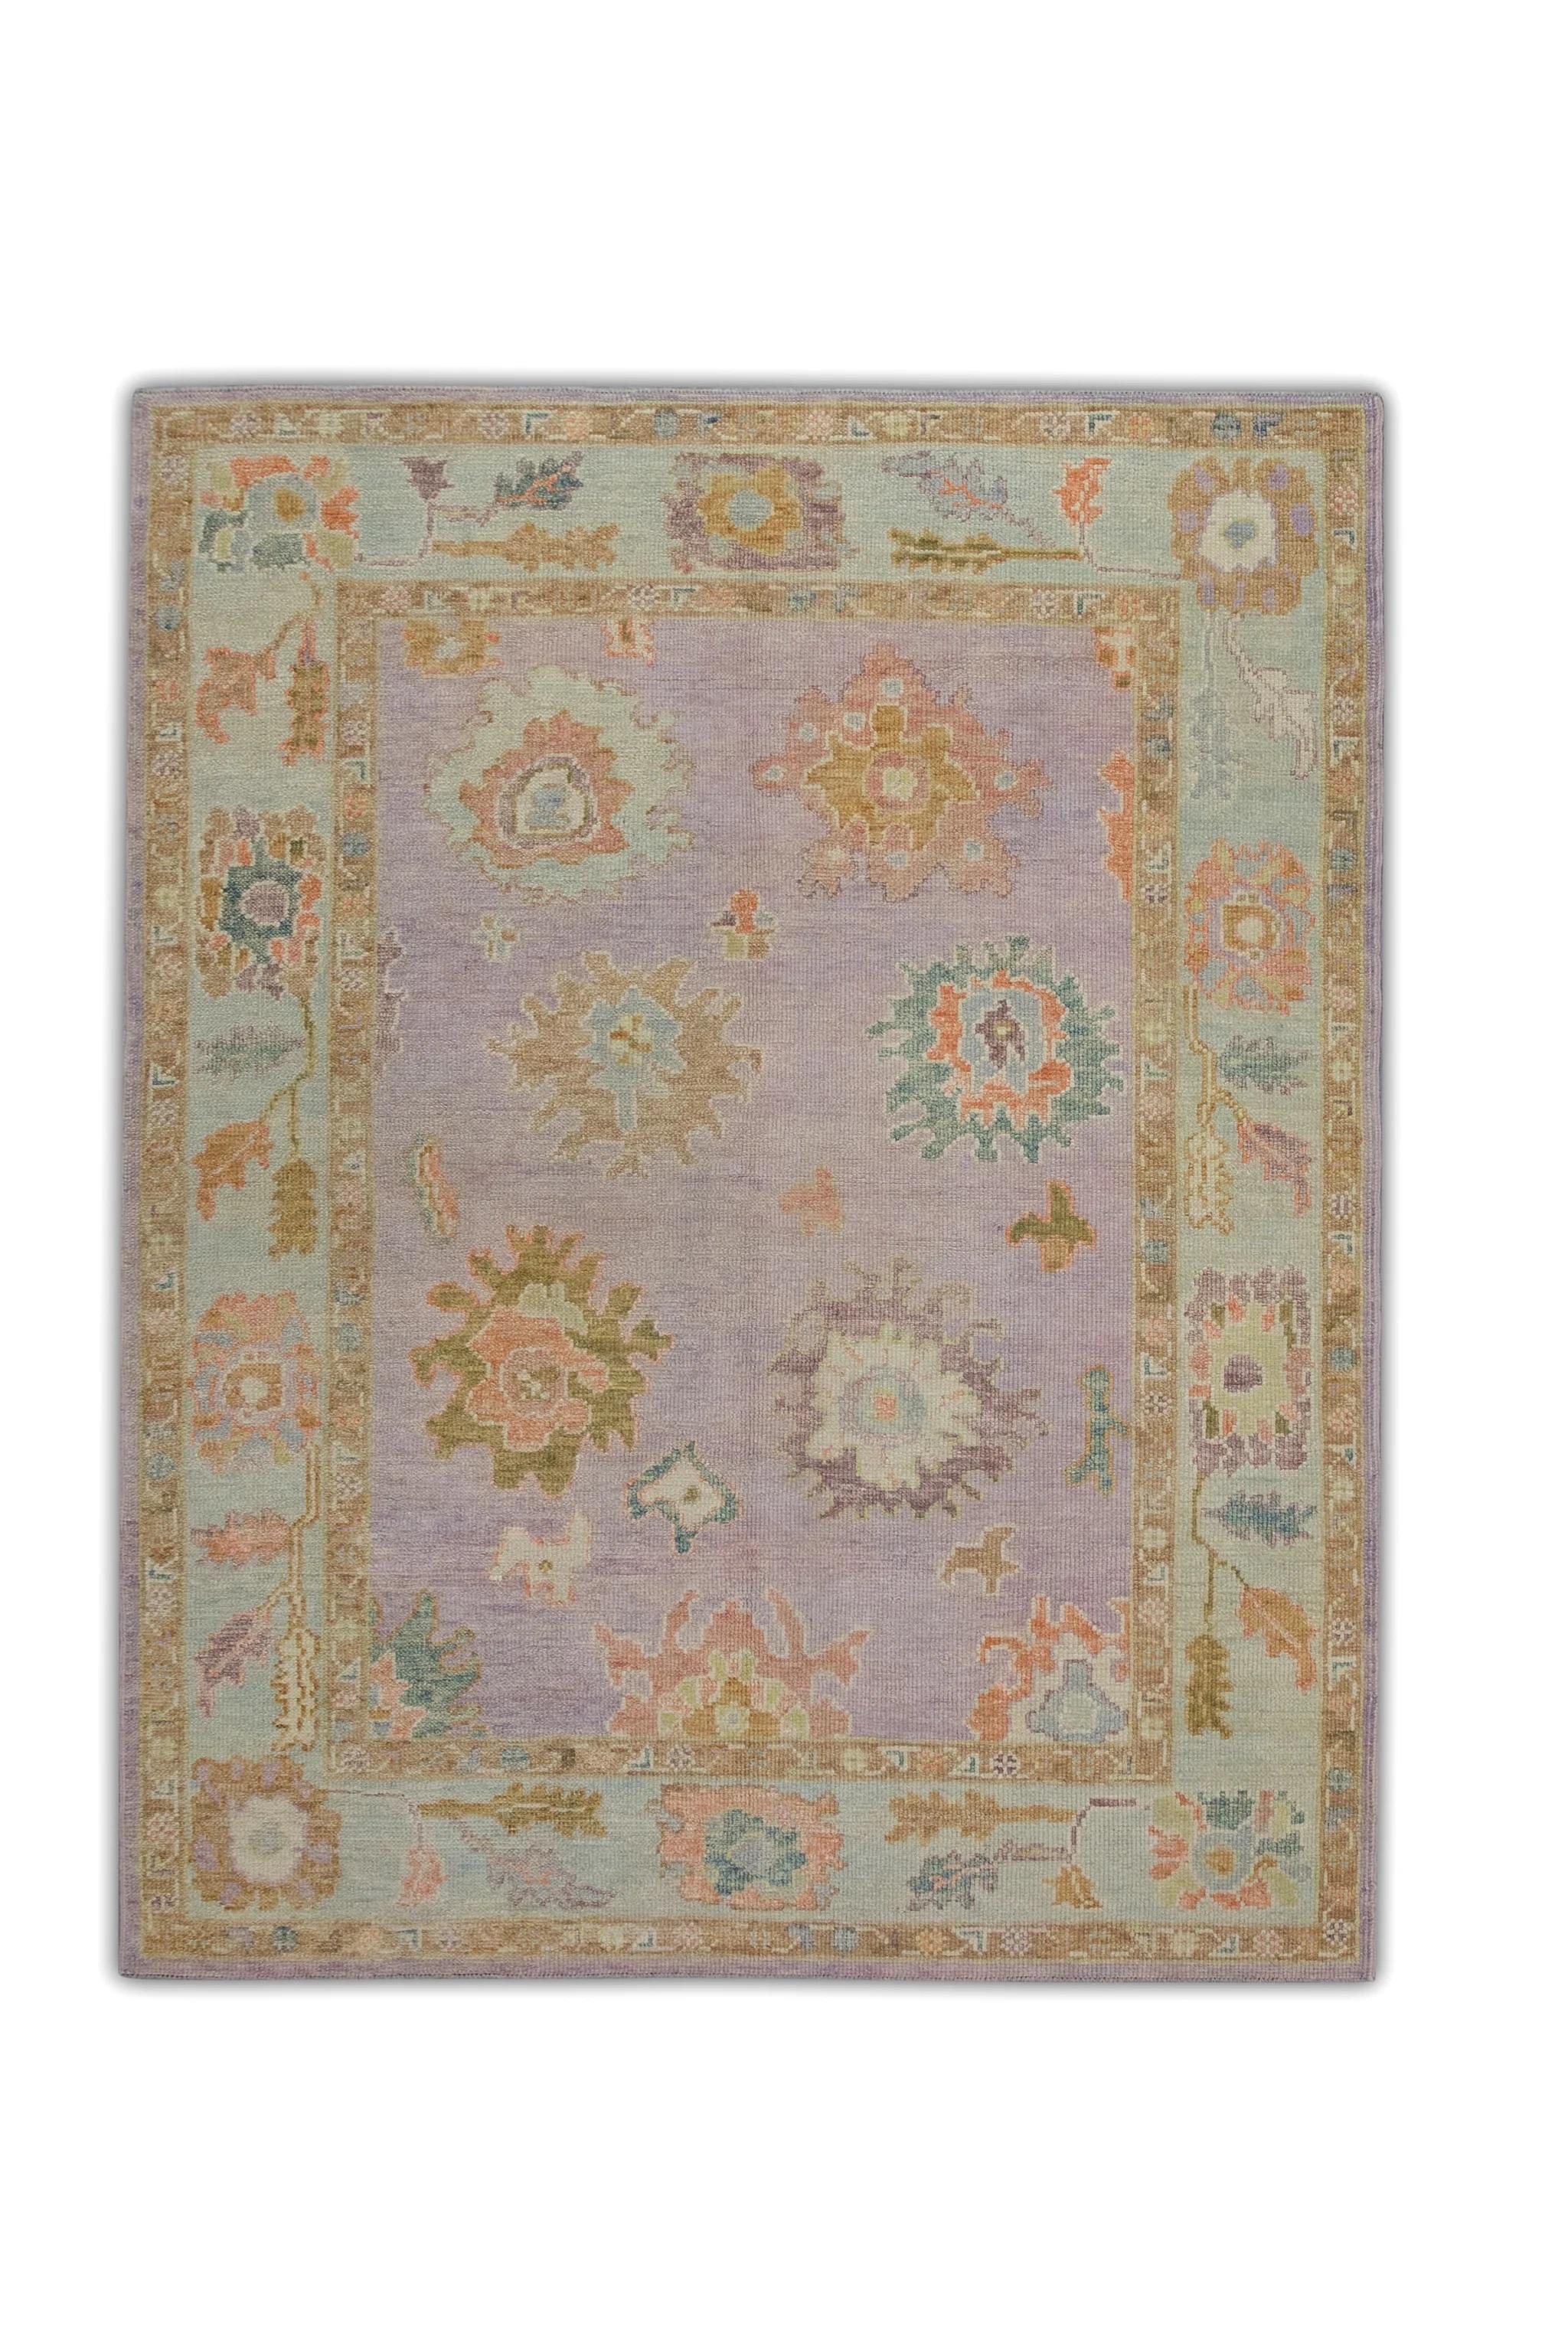 Soft Purple Handwoven Wool Turkish Oushak Rug w/ Colorful Floral Design 5'1x6'8 For Sale 1